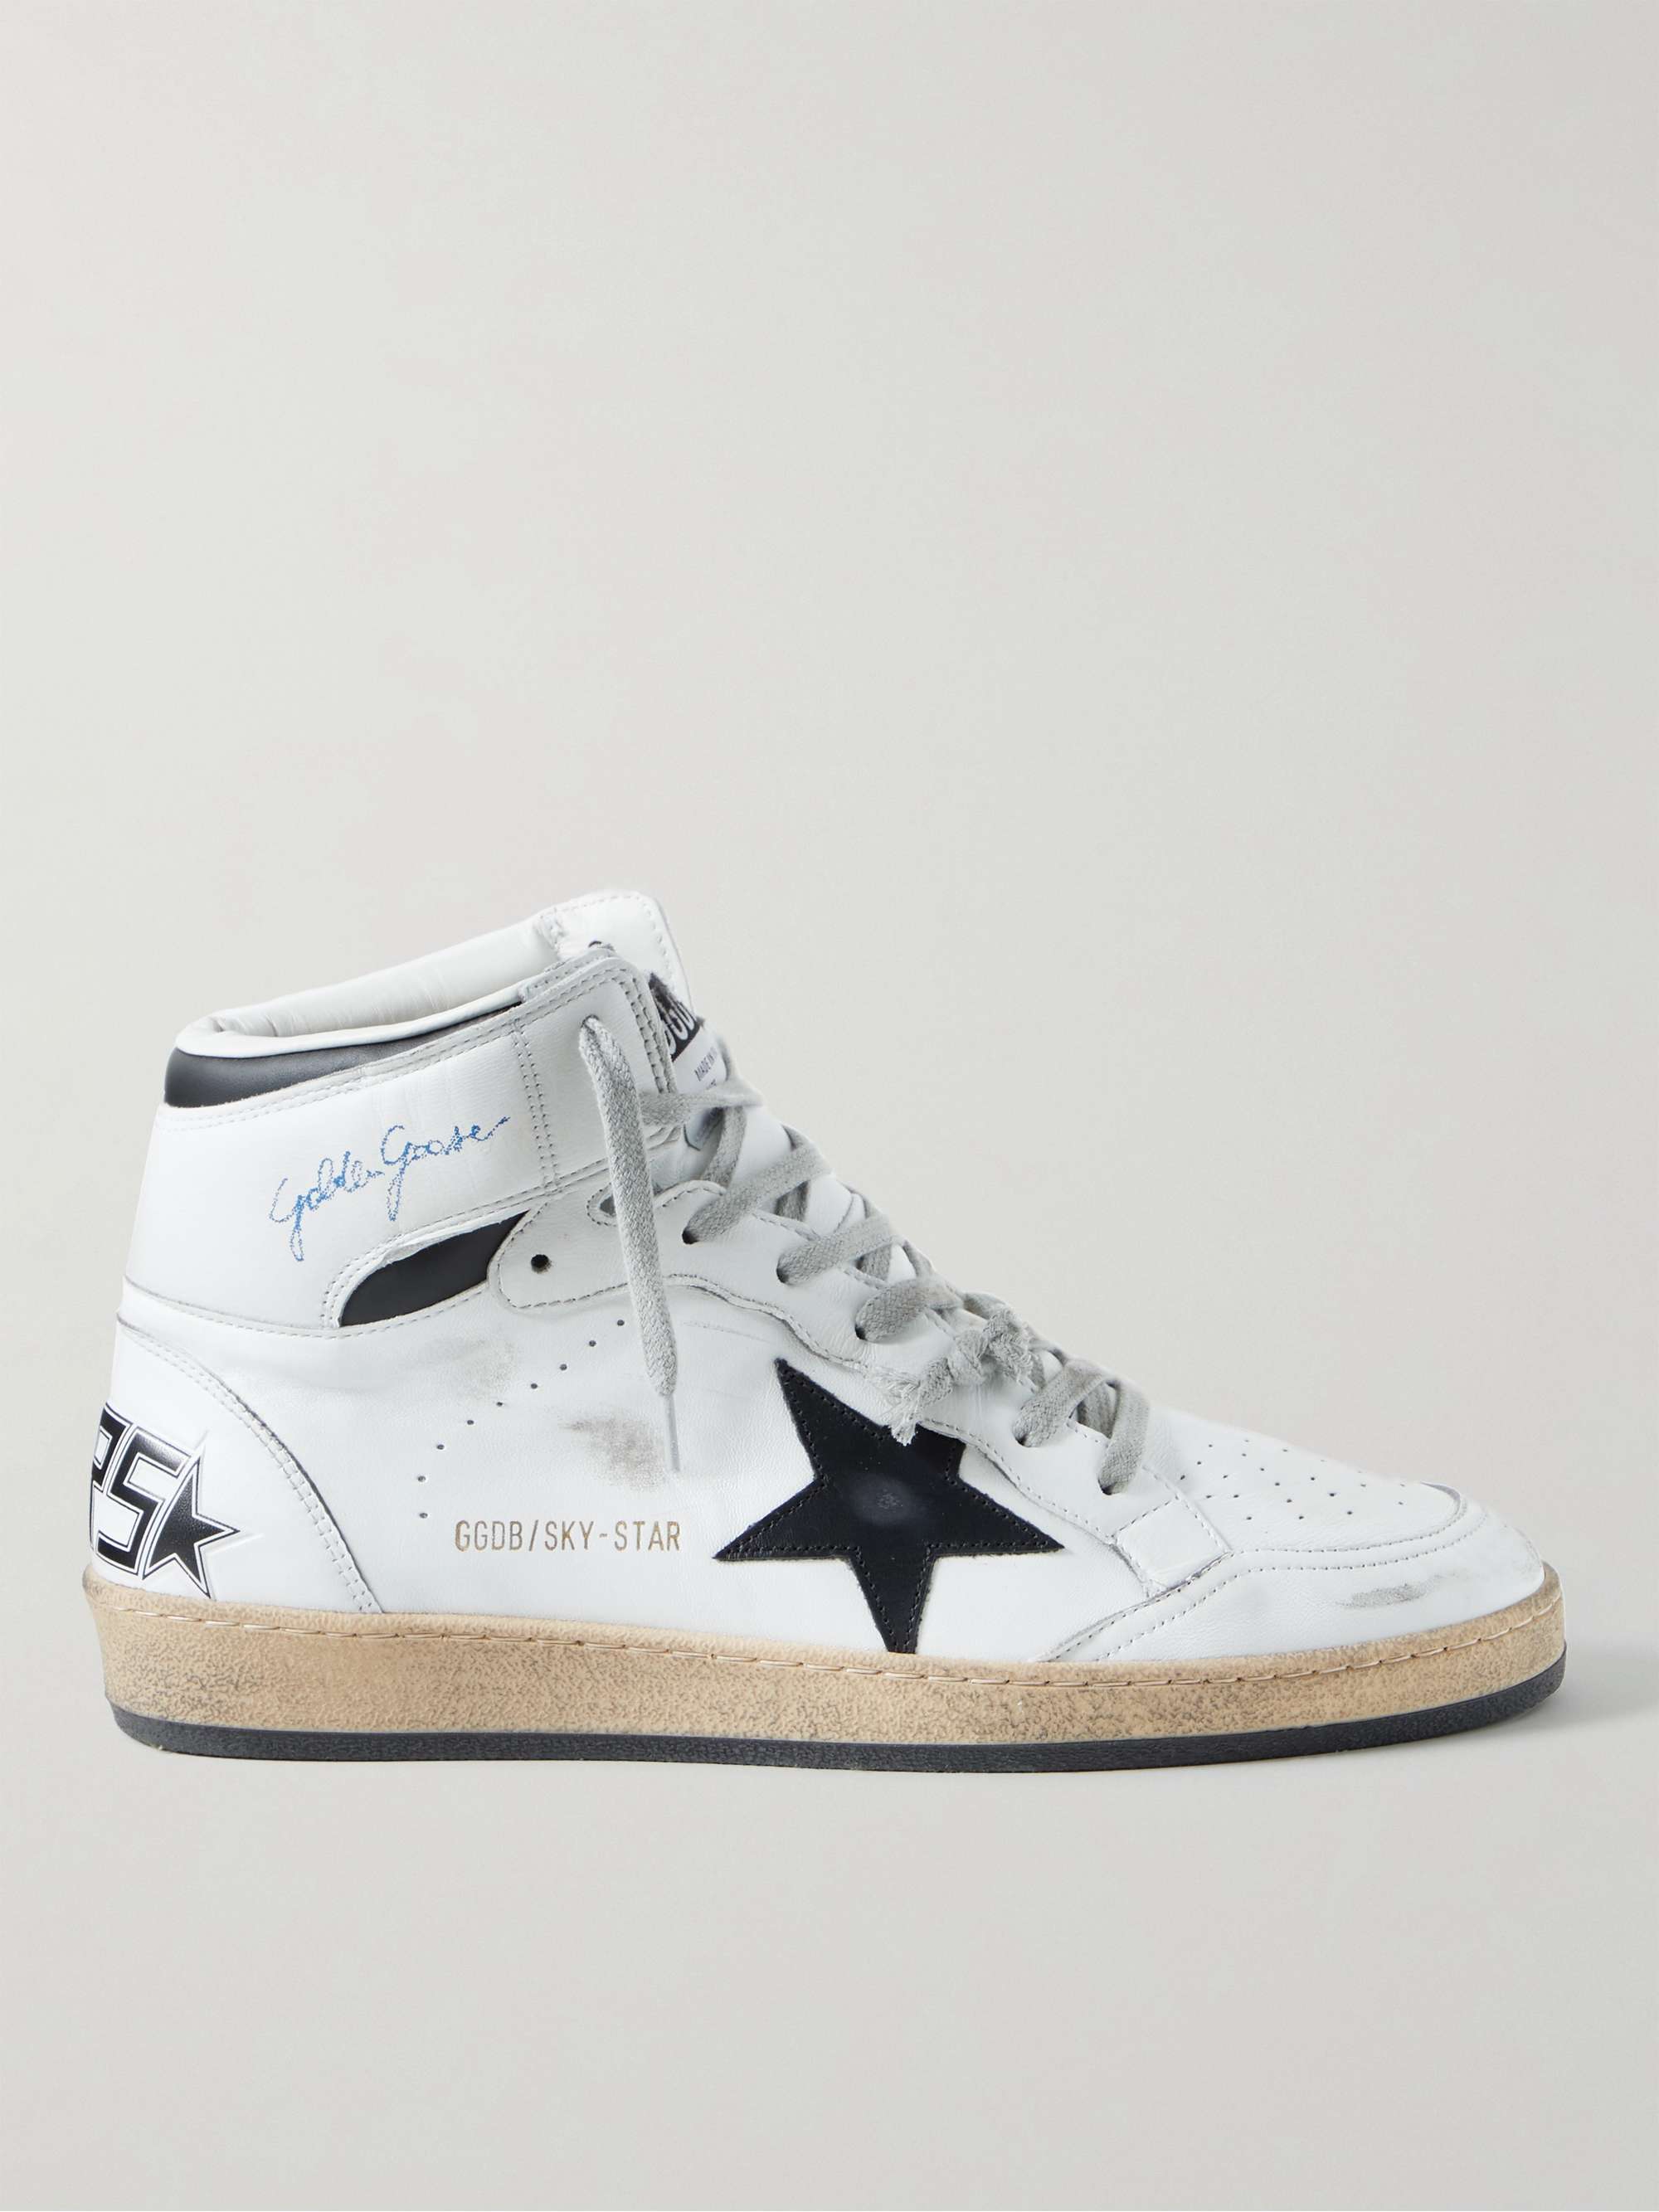 GOLDEN GOOSE Sky Star Distressed Leather High-Top Sneakers | MR PORTER